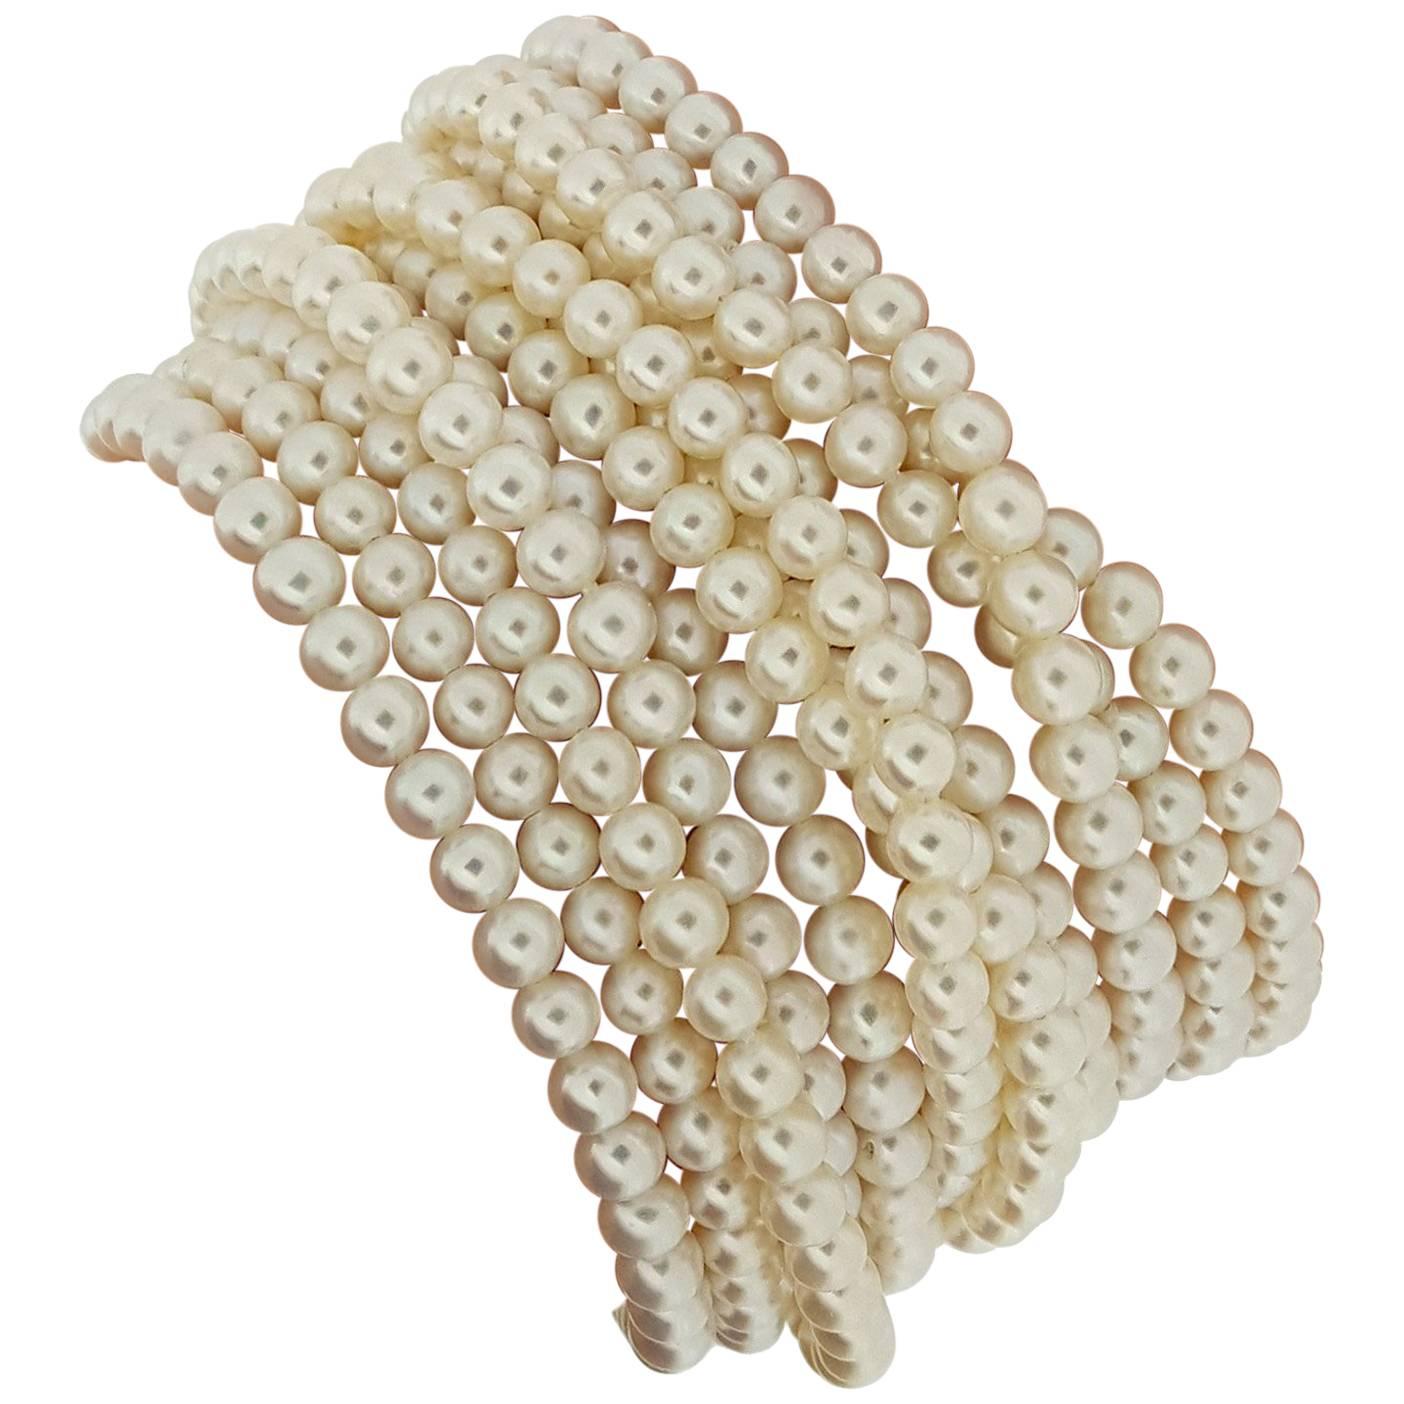 This incredible pearl bracelet designed and signed by Elizabeth Locke features 12 individual strands of pearls measuring approximately 4.5mm. The bracelet is 7.25 inches long and secured with a handmade 18kt yellow gold hammered clasp with beaded